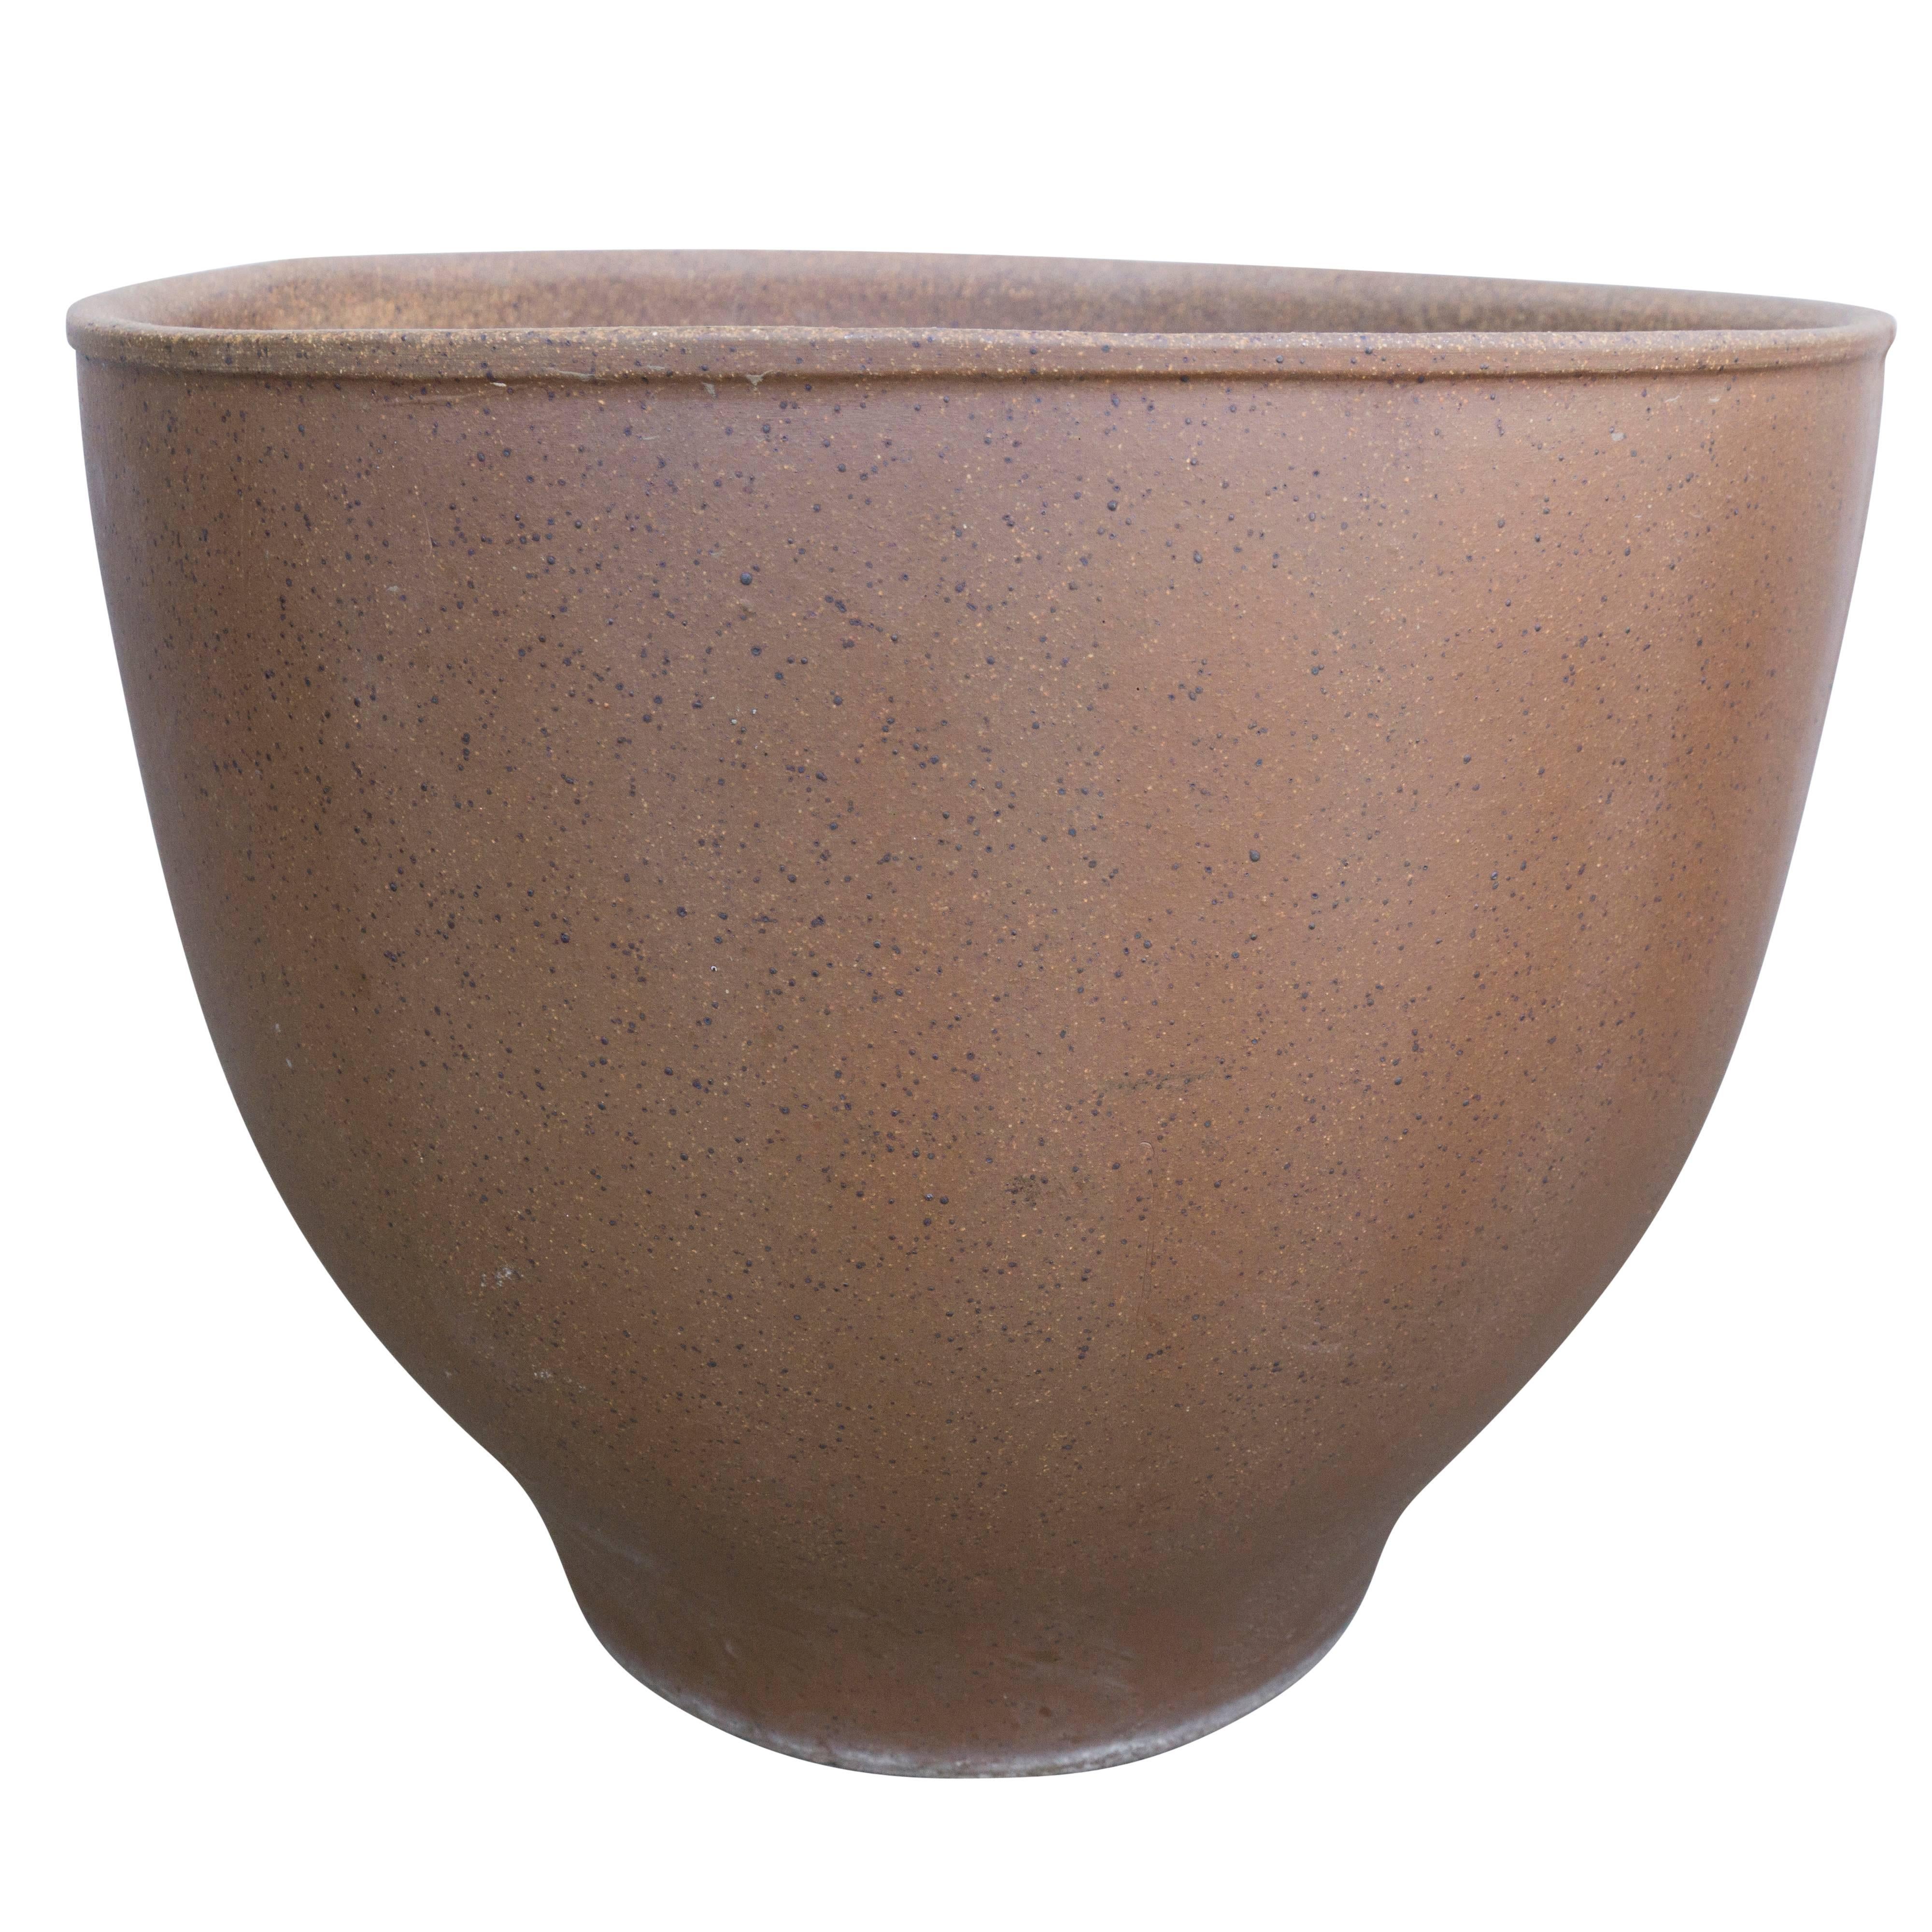 The stoneware natural speckled brown color seen in earth gender pottery on this glazed stoneware bell by California pottery icon David Cressey. The sleek bell shape and balance of this vessel makes it a visually delightful addition to a home or